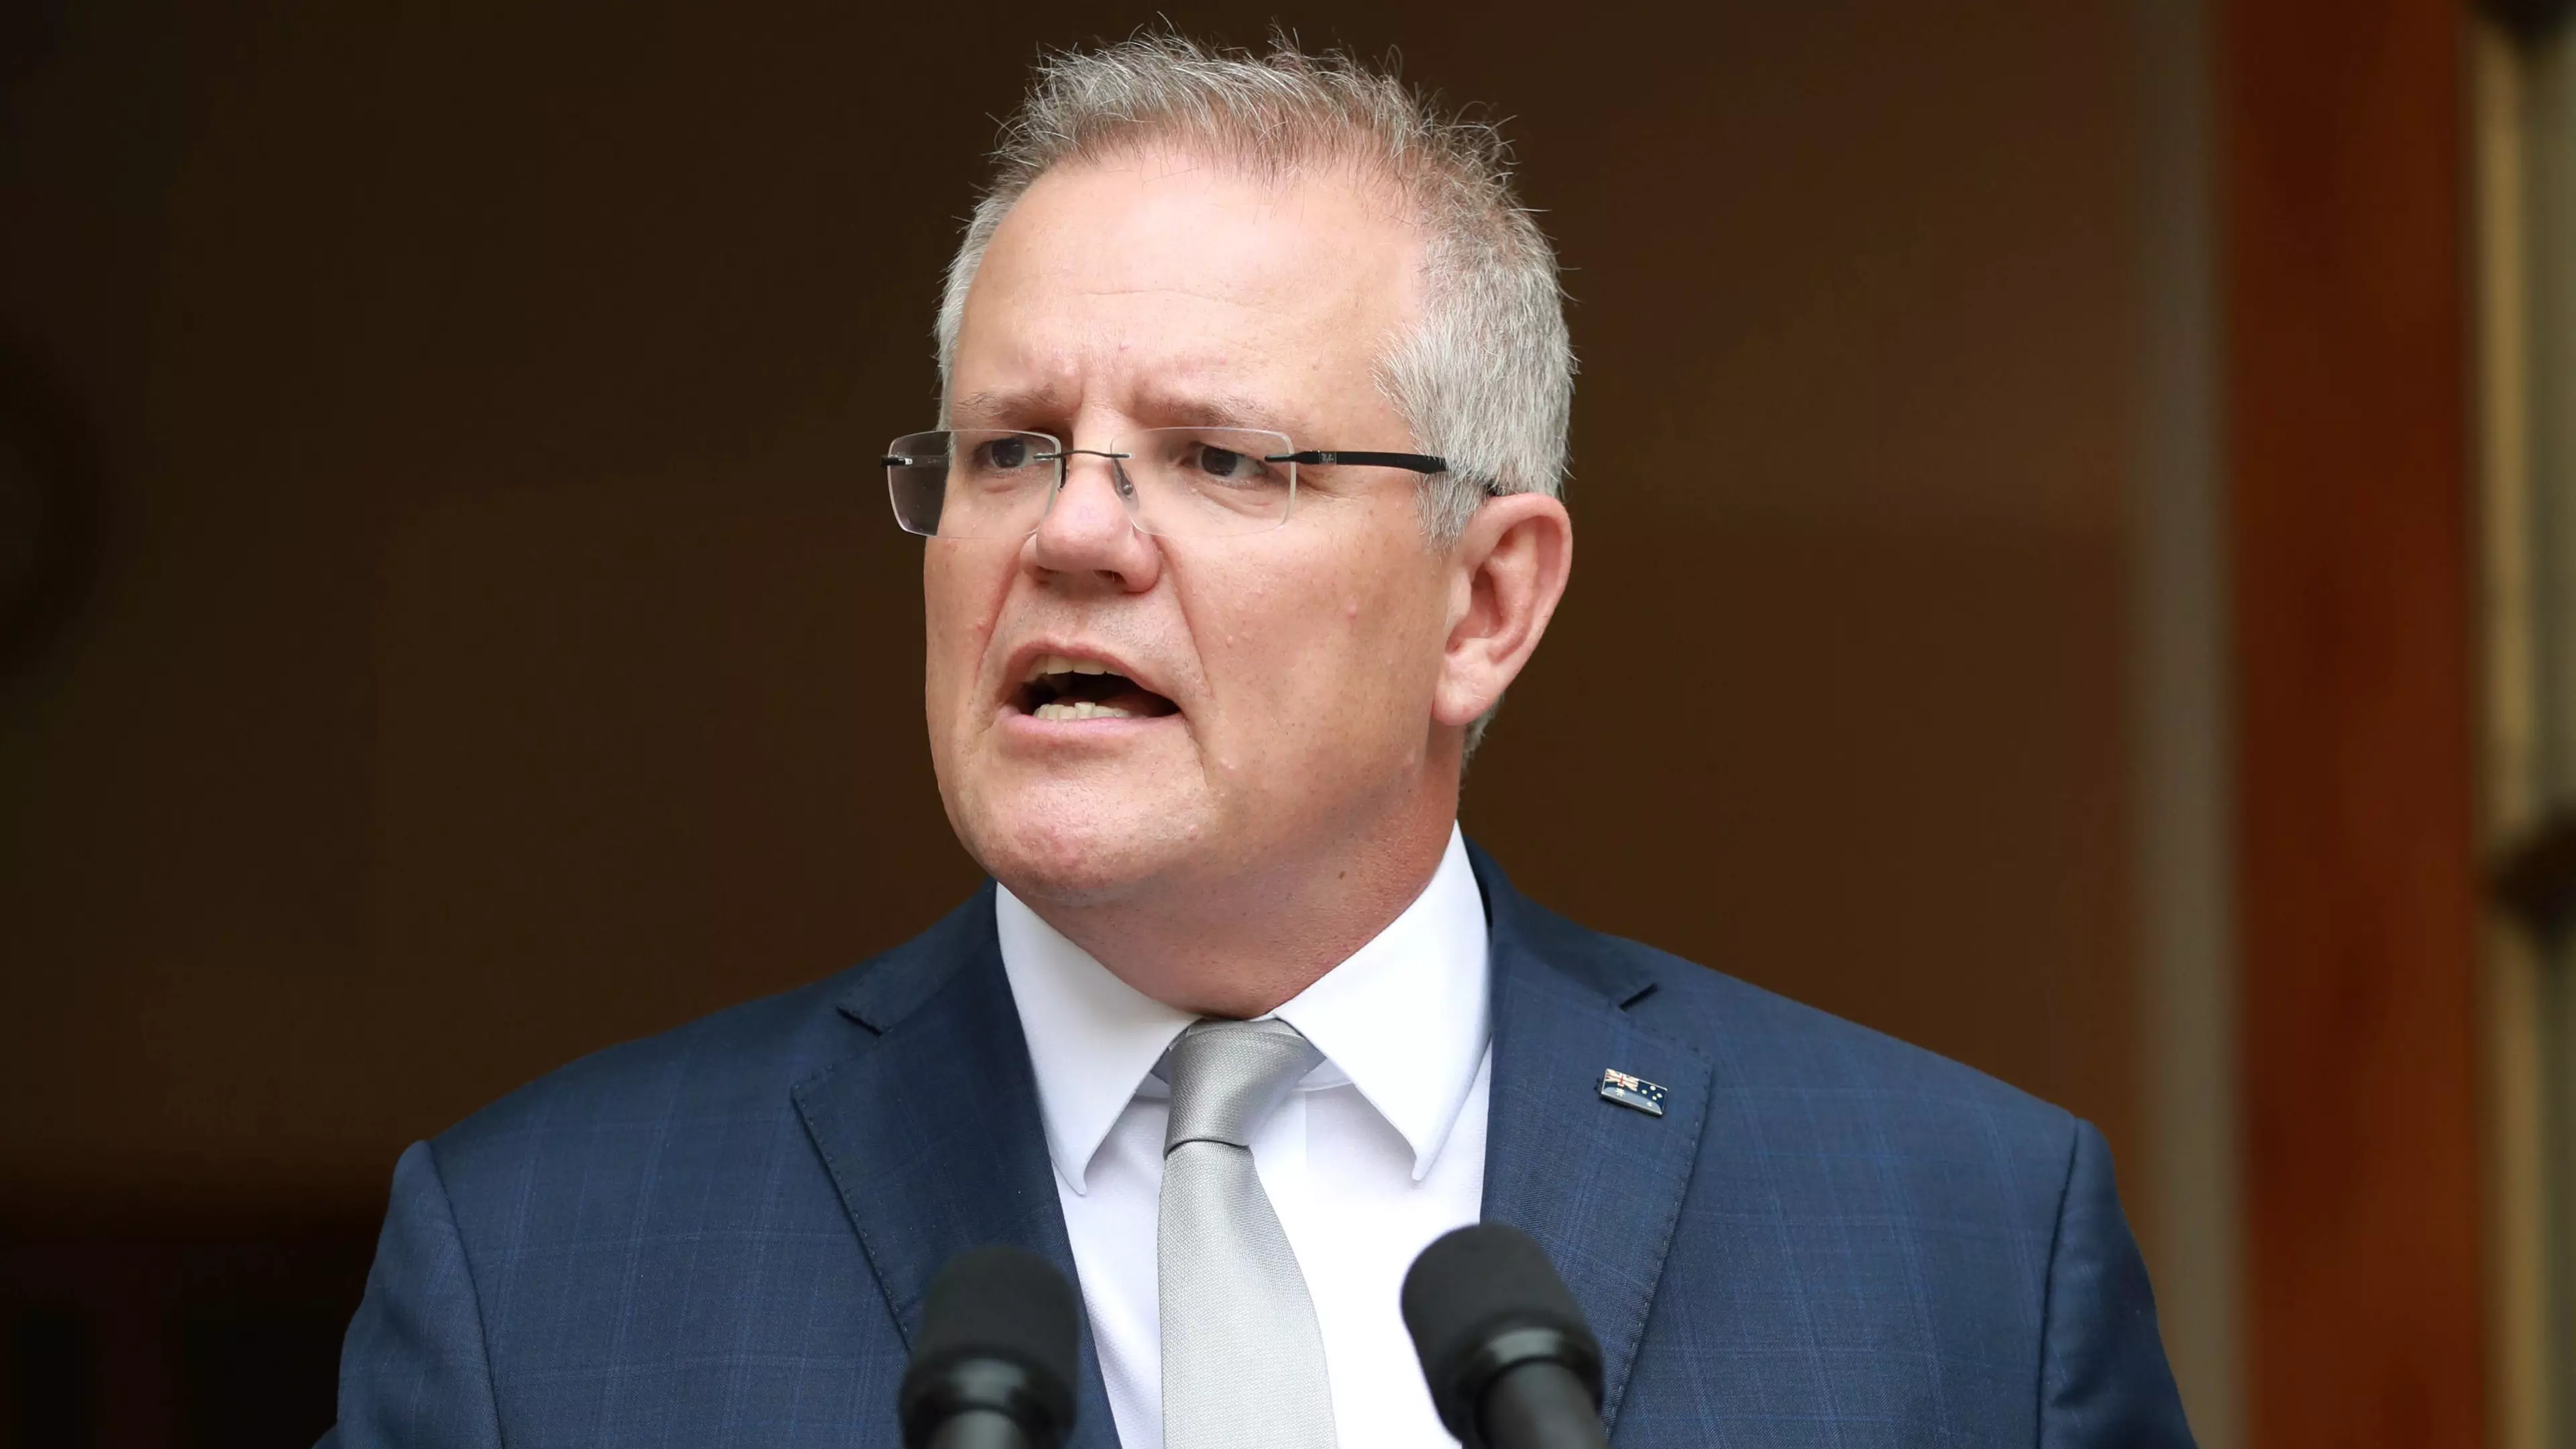 Scott Morrison Pleads With Australians To Stay At Home Over Easter Weekend